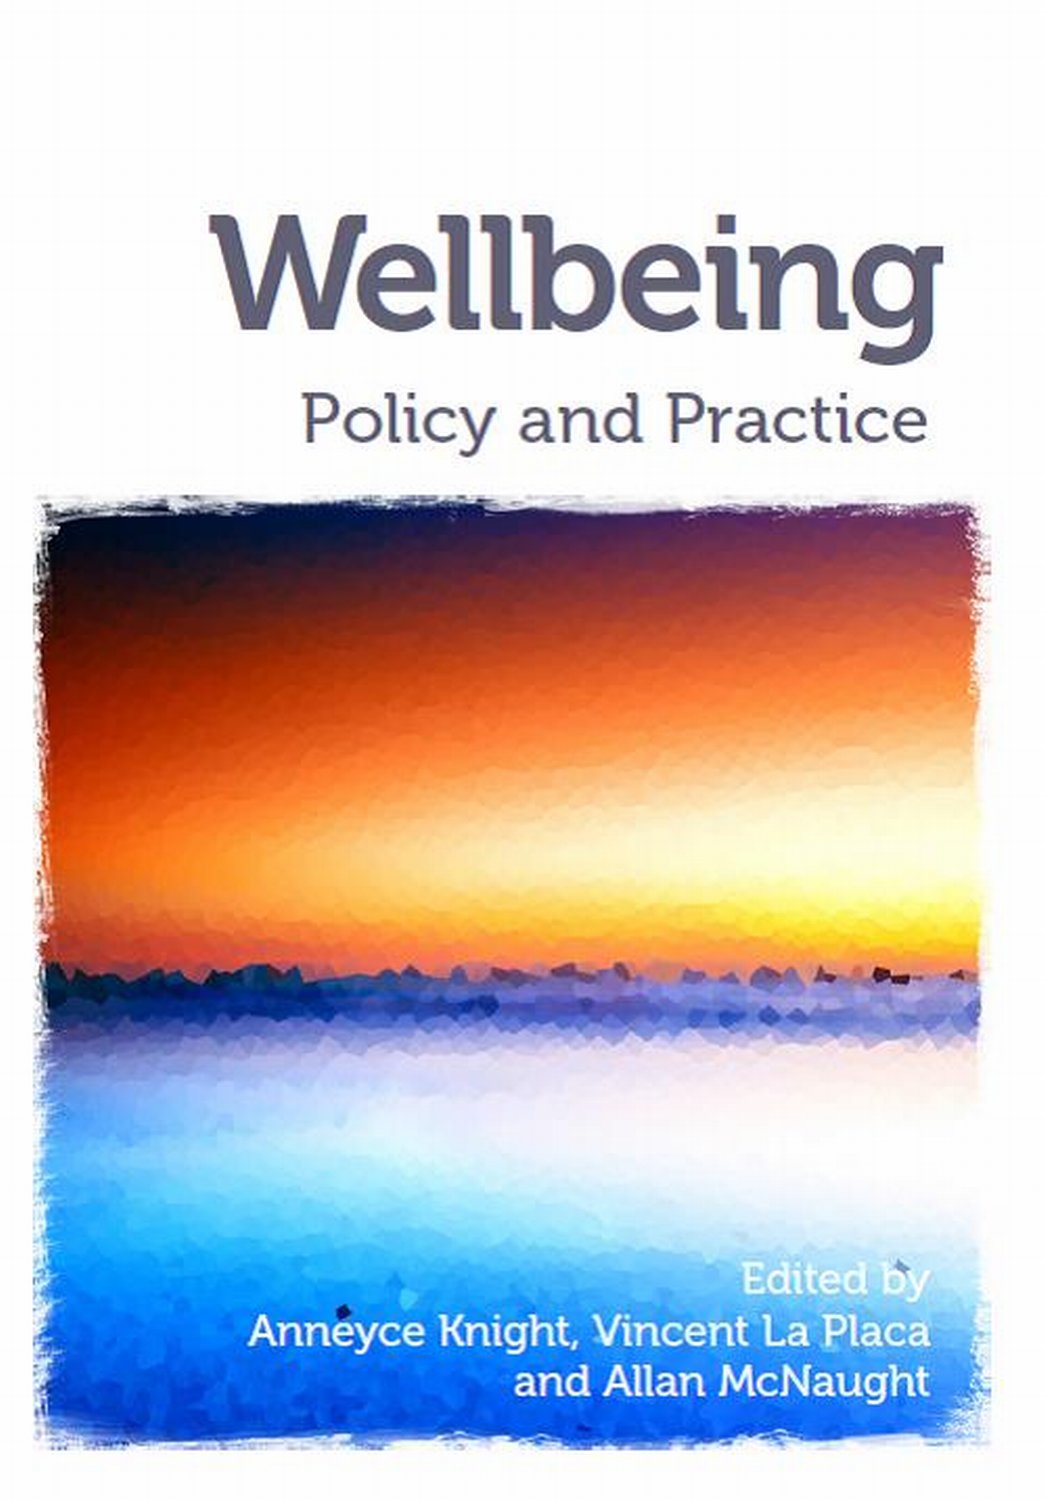 Wellbeing: Policy and Practice